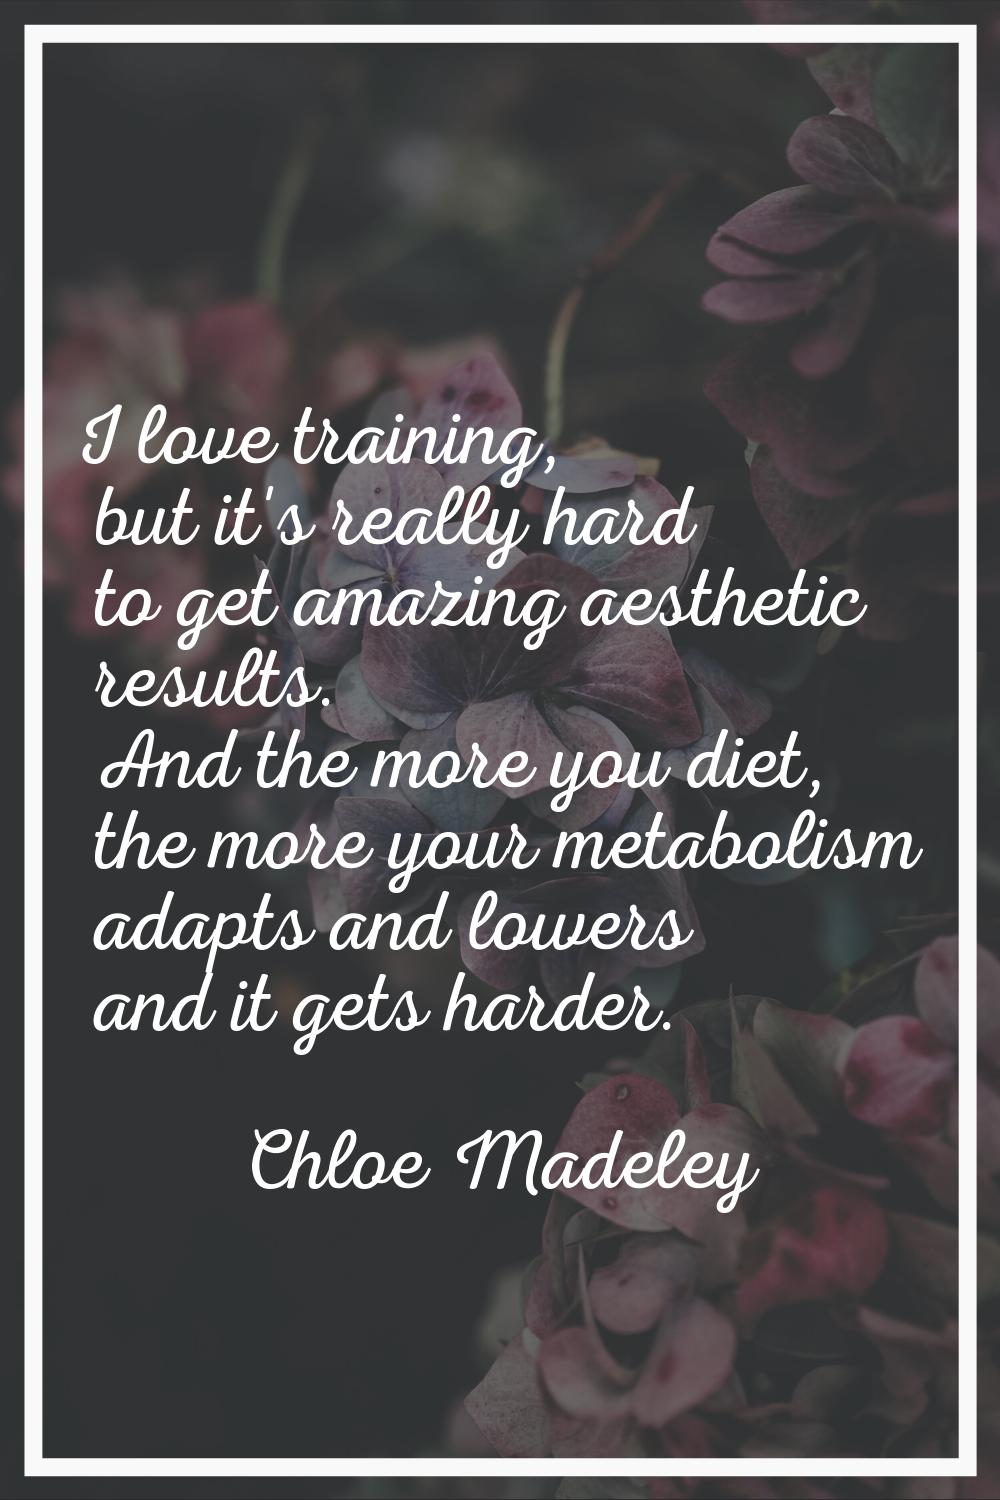 I love training, but it's really hard to get amazing aesthetic results. And the more you diet, the 